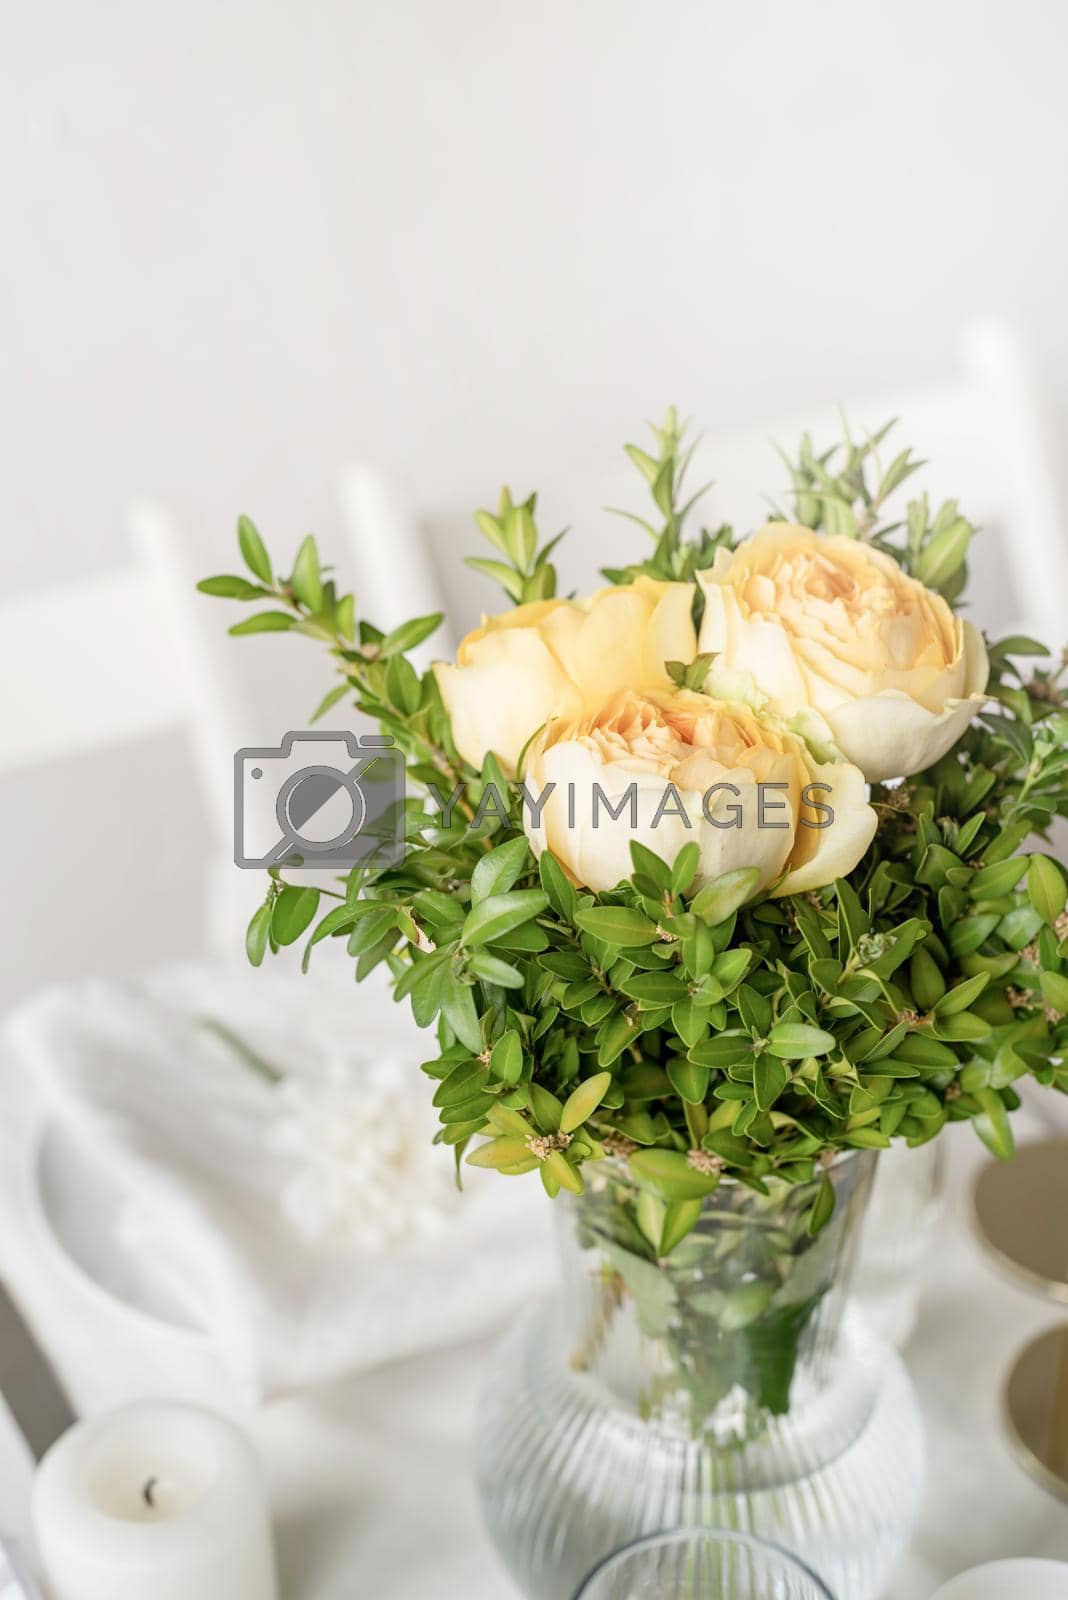 Royalty free image of The wedding decor. Wedding teble decoration with beige roses, closeup by Desperada